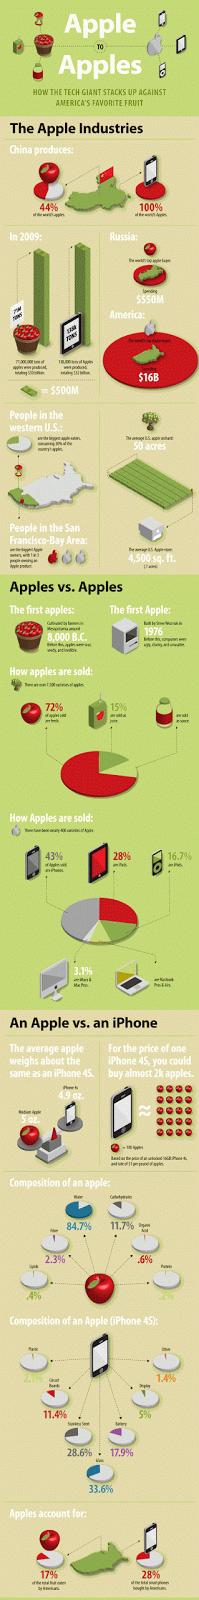 iPhone Infographic Apple The Fruit Vs The Products Image